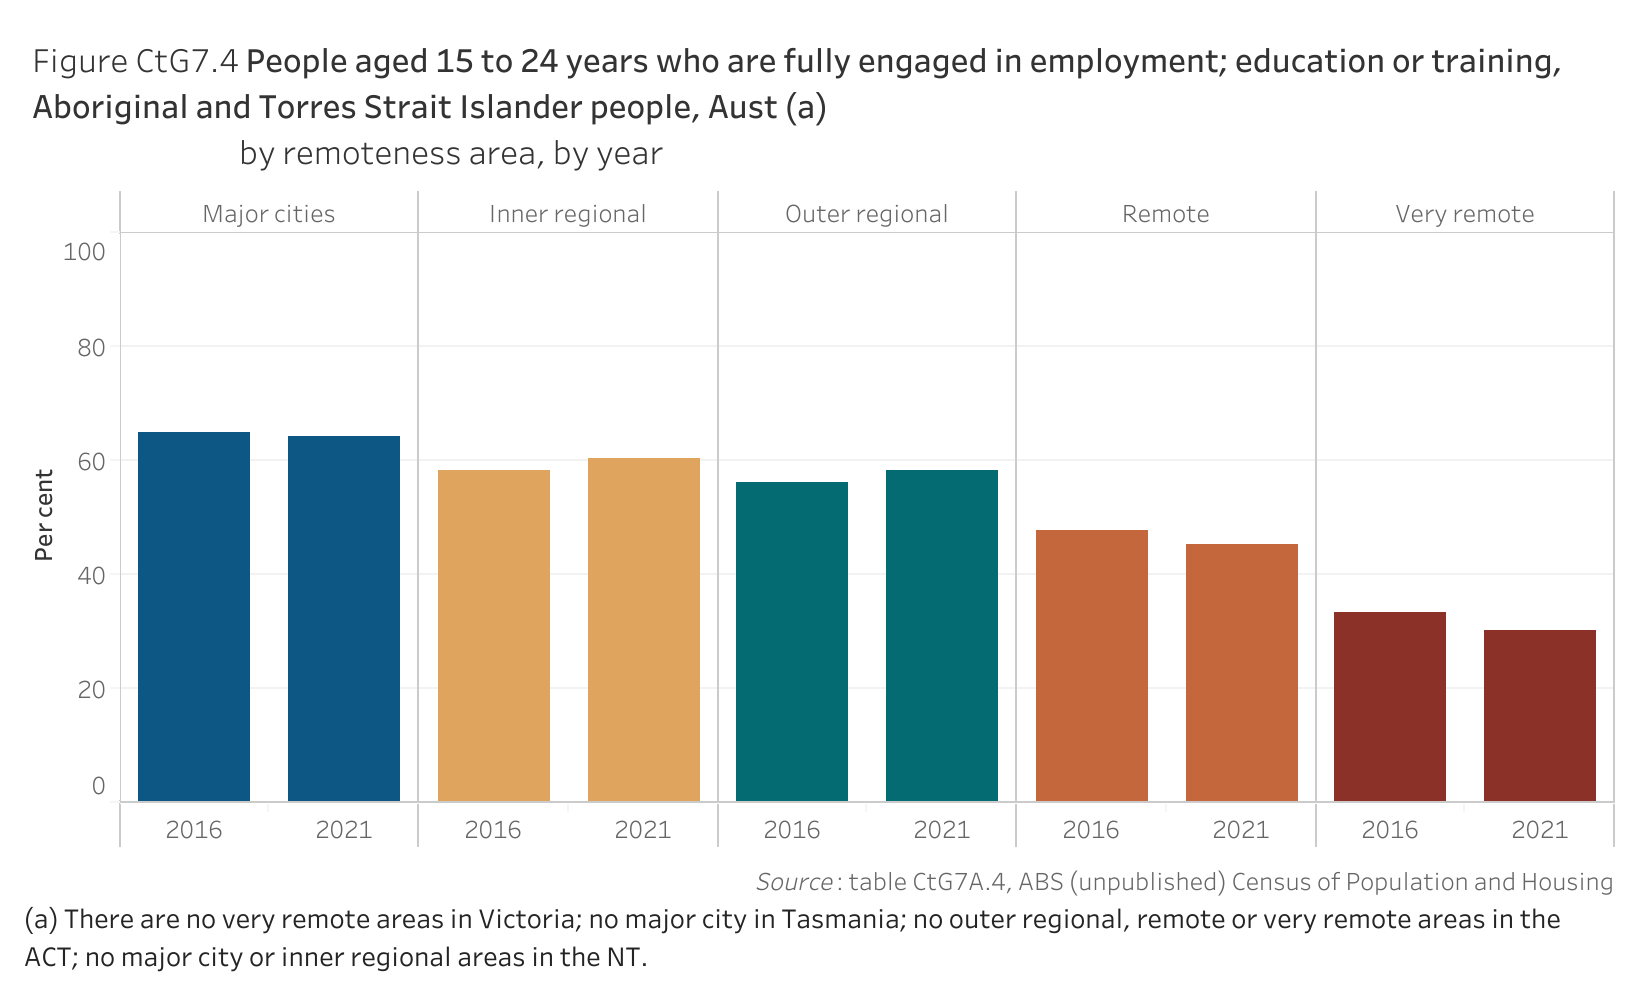 Figure CtG7.4 shows people aged 15 to 24 years who are fully engaged in employment; education or training, Aboriginal and Torres Strait Islander people, Australia, by remoteness area, by year. More details can be found within the text near this image.